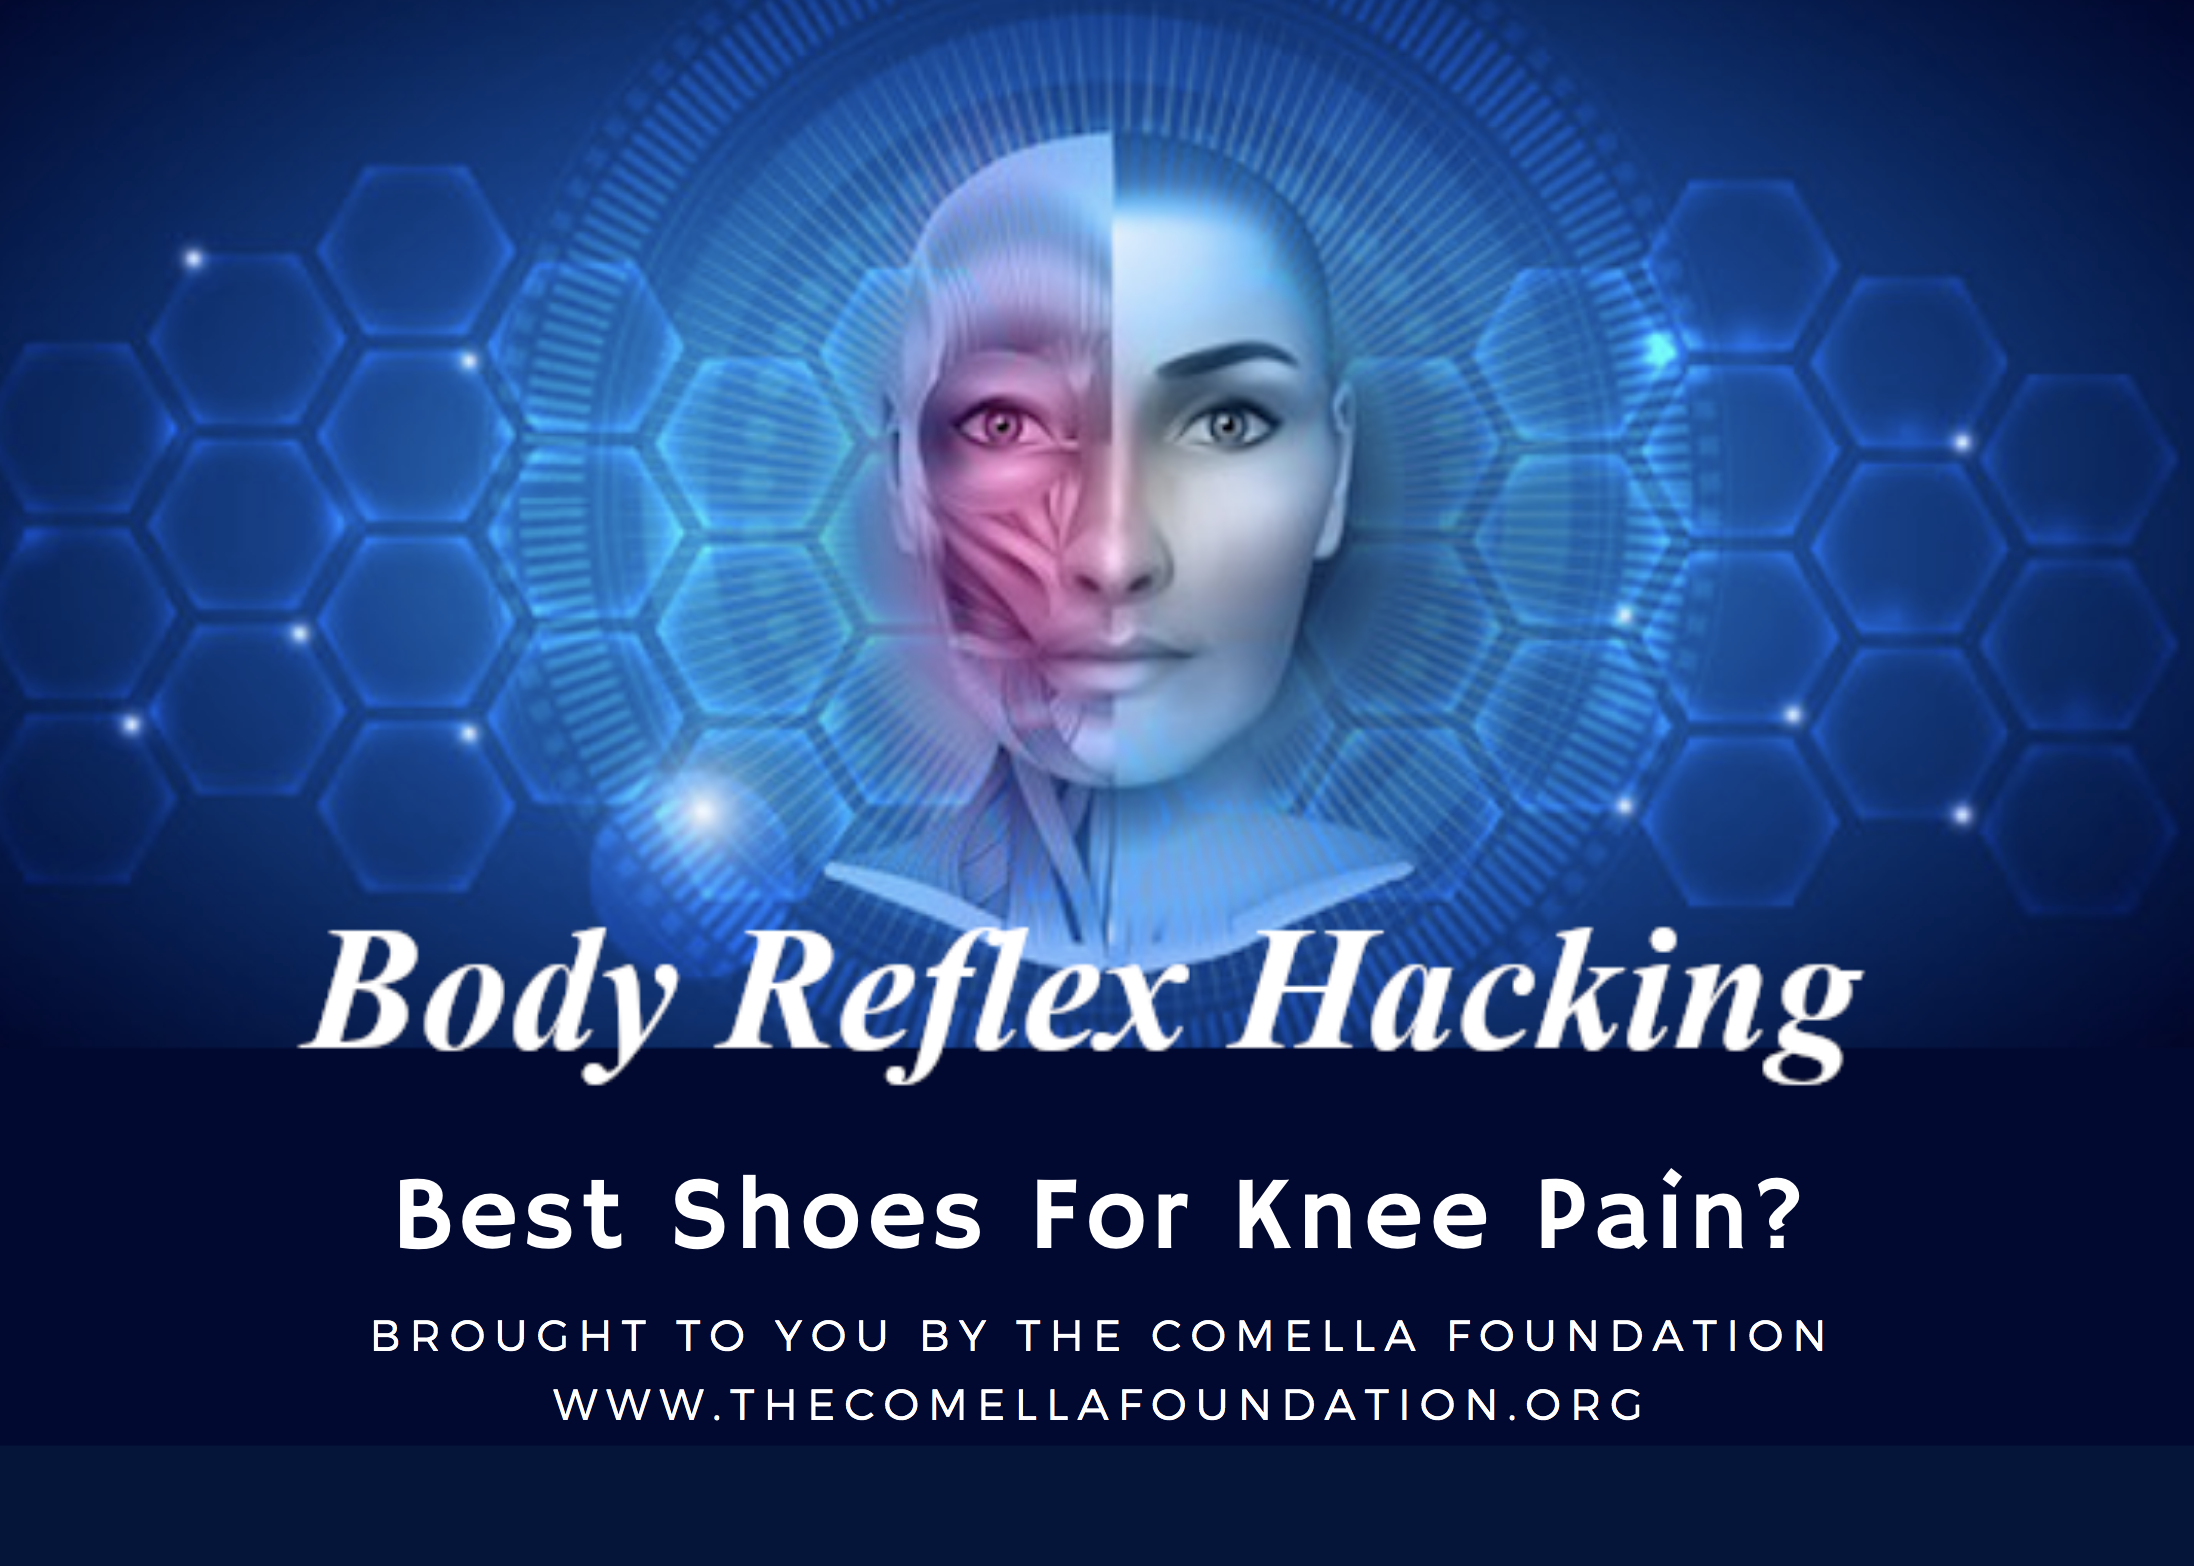 Body Reflex Hacking: Best Shoes For Knee Pain